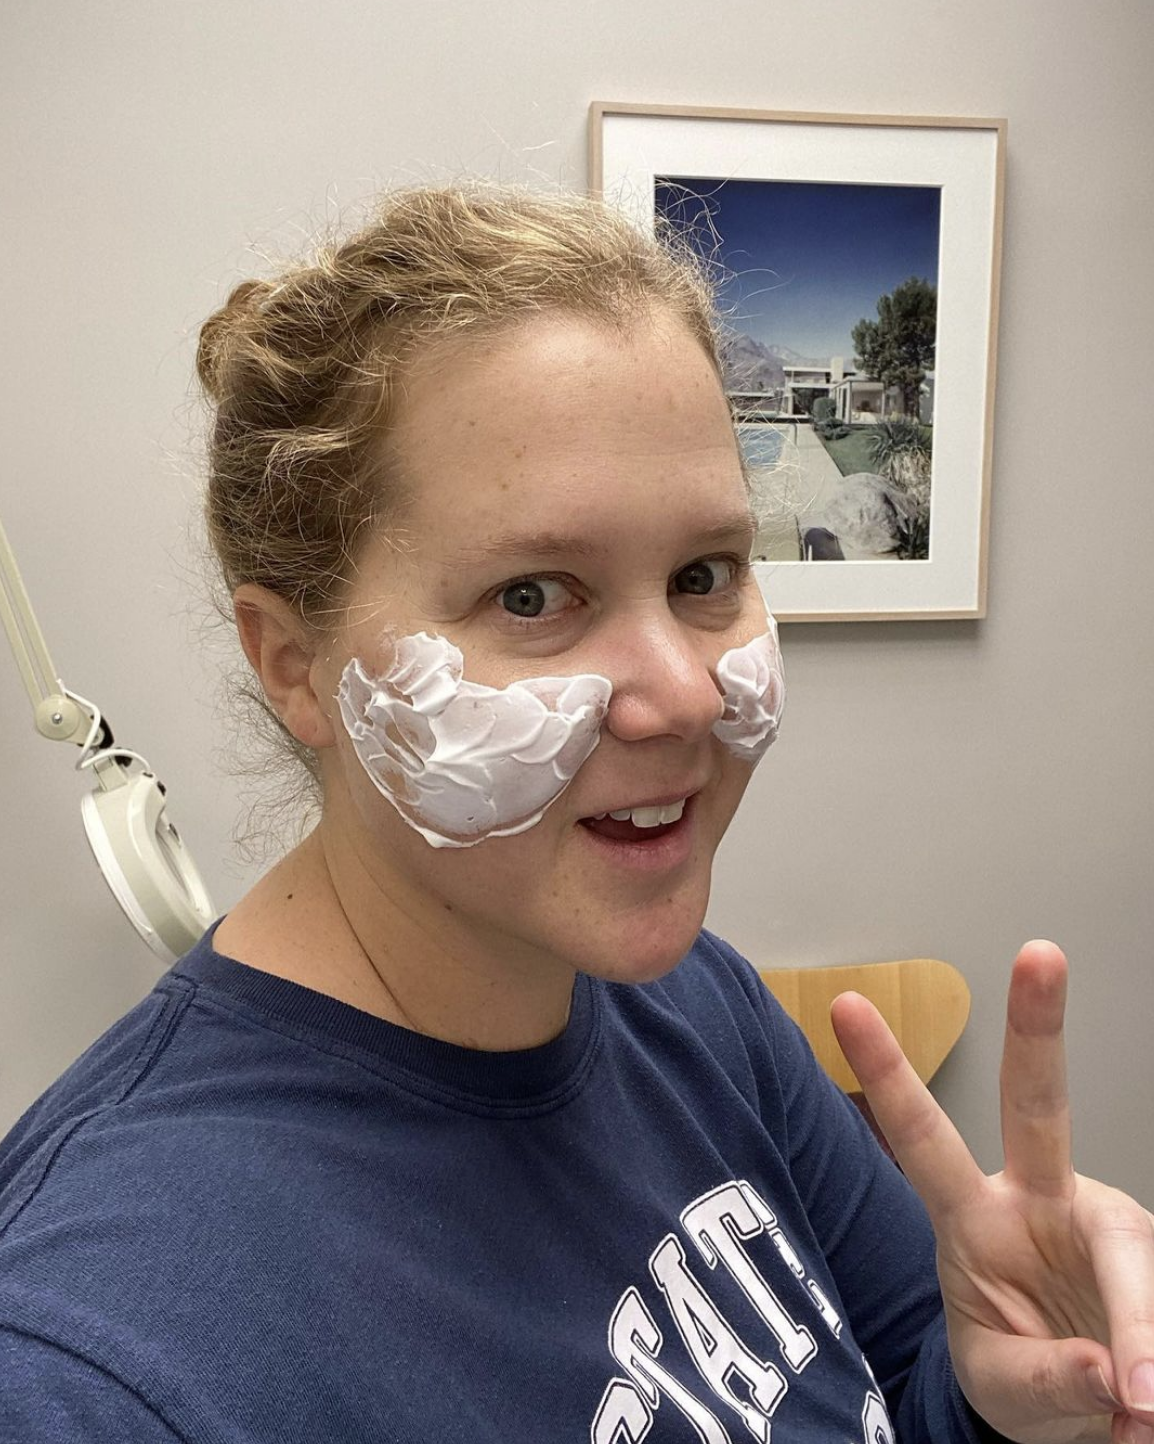 <p>"I tried getting fillers. Turns out I was already full. Thank God you can dissolve them I looked like #malificent thanks @drjlodnp," comedian <a href="https://www.wonderwall.com/celebrity/profiles/overview/amy-schumer-1586.article">Amy Schumer</a> captioned this selfie on Dec. 26, 2021. Amy's practitioner, Jodi LoGerfo DNP, APRN, FNP-C, explained on her own Instagram that "using dermal filler can be a wonderful way to replace lost volume and enhance the face, but filler placement is extremely important." She said Amy came to her "<span>after having filler elsewhere and we decided that where the filler was placed was not ideal, so we dissolved it! Dissolving filler is a very simple and quick treatment</span>." A month later, Amy revealed more...</p>